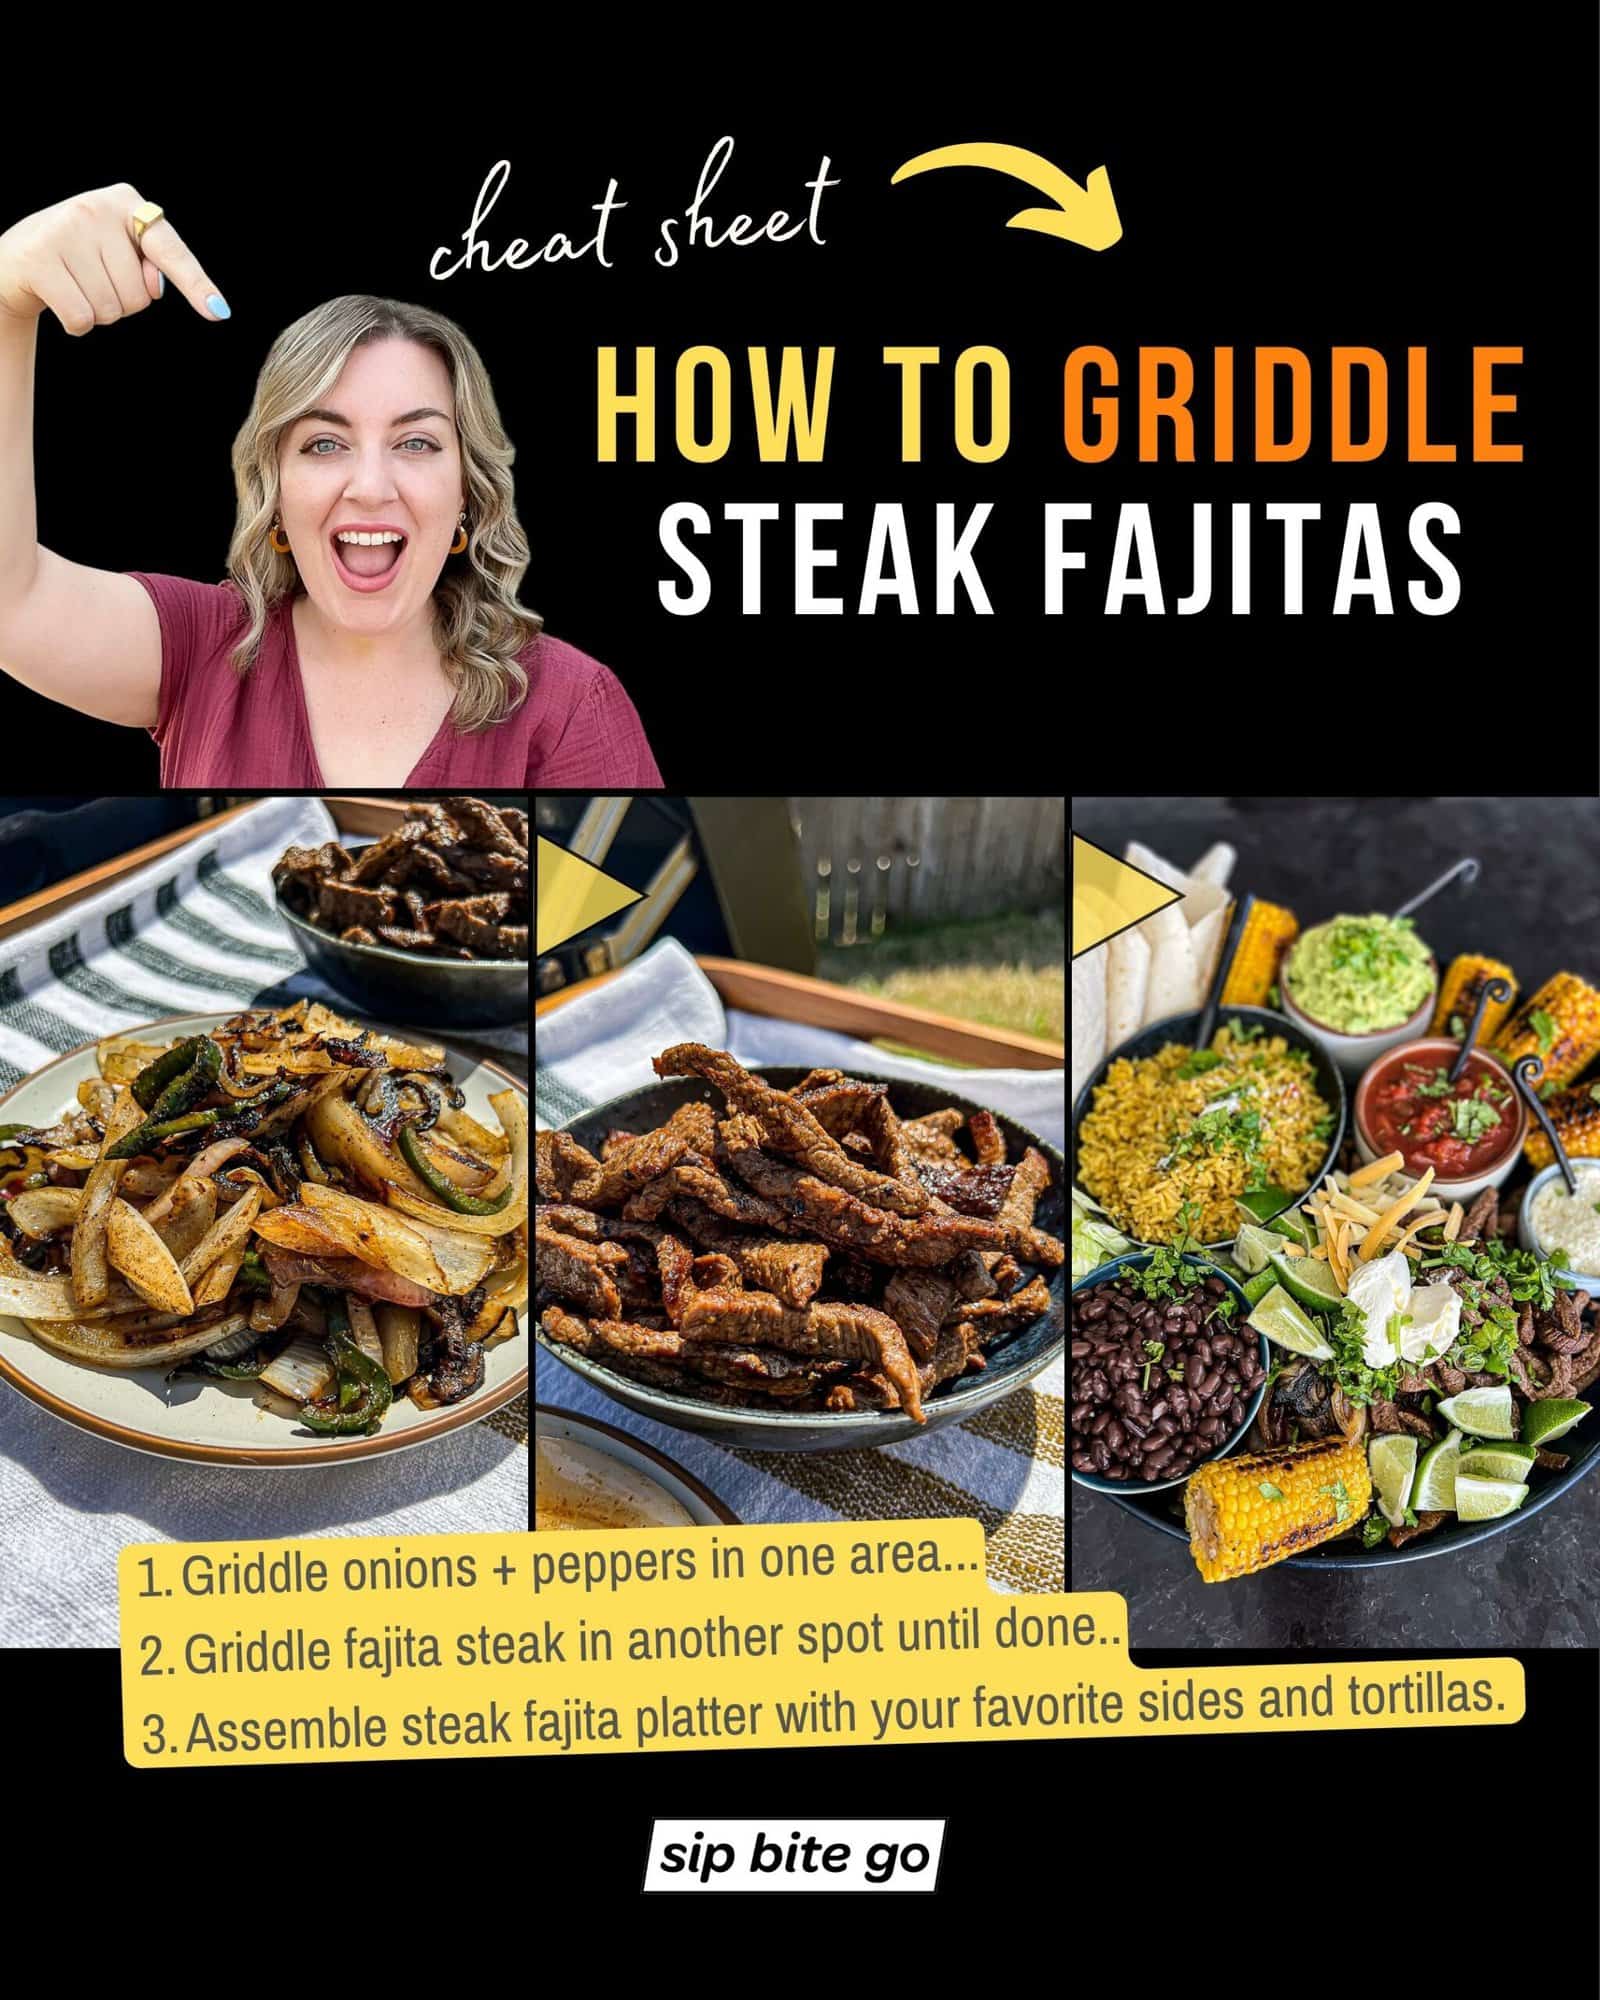 Infographic with recipe steps for griddling steak fajitas on the Traeger Flatrock Griddle with Sip Bite Go logo and text descriptions